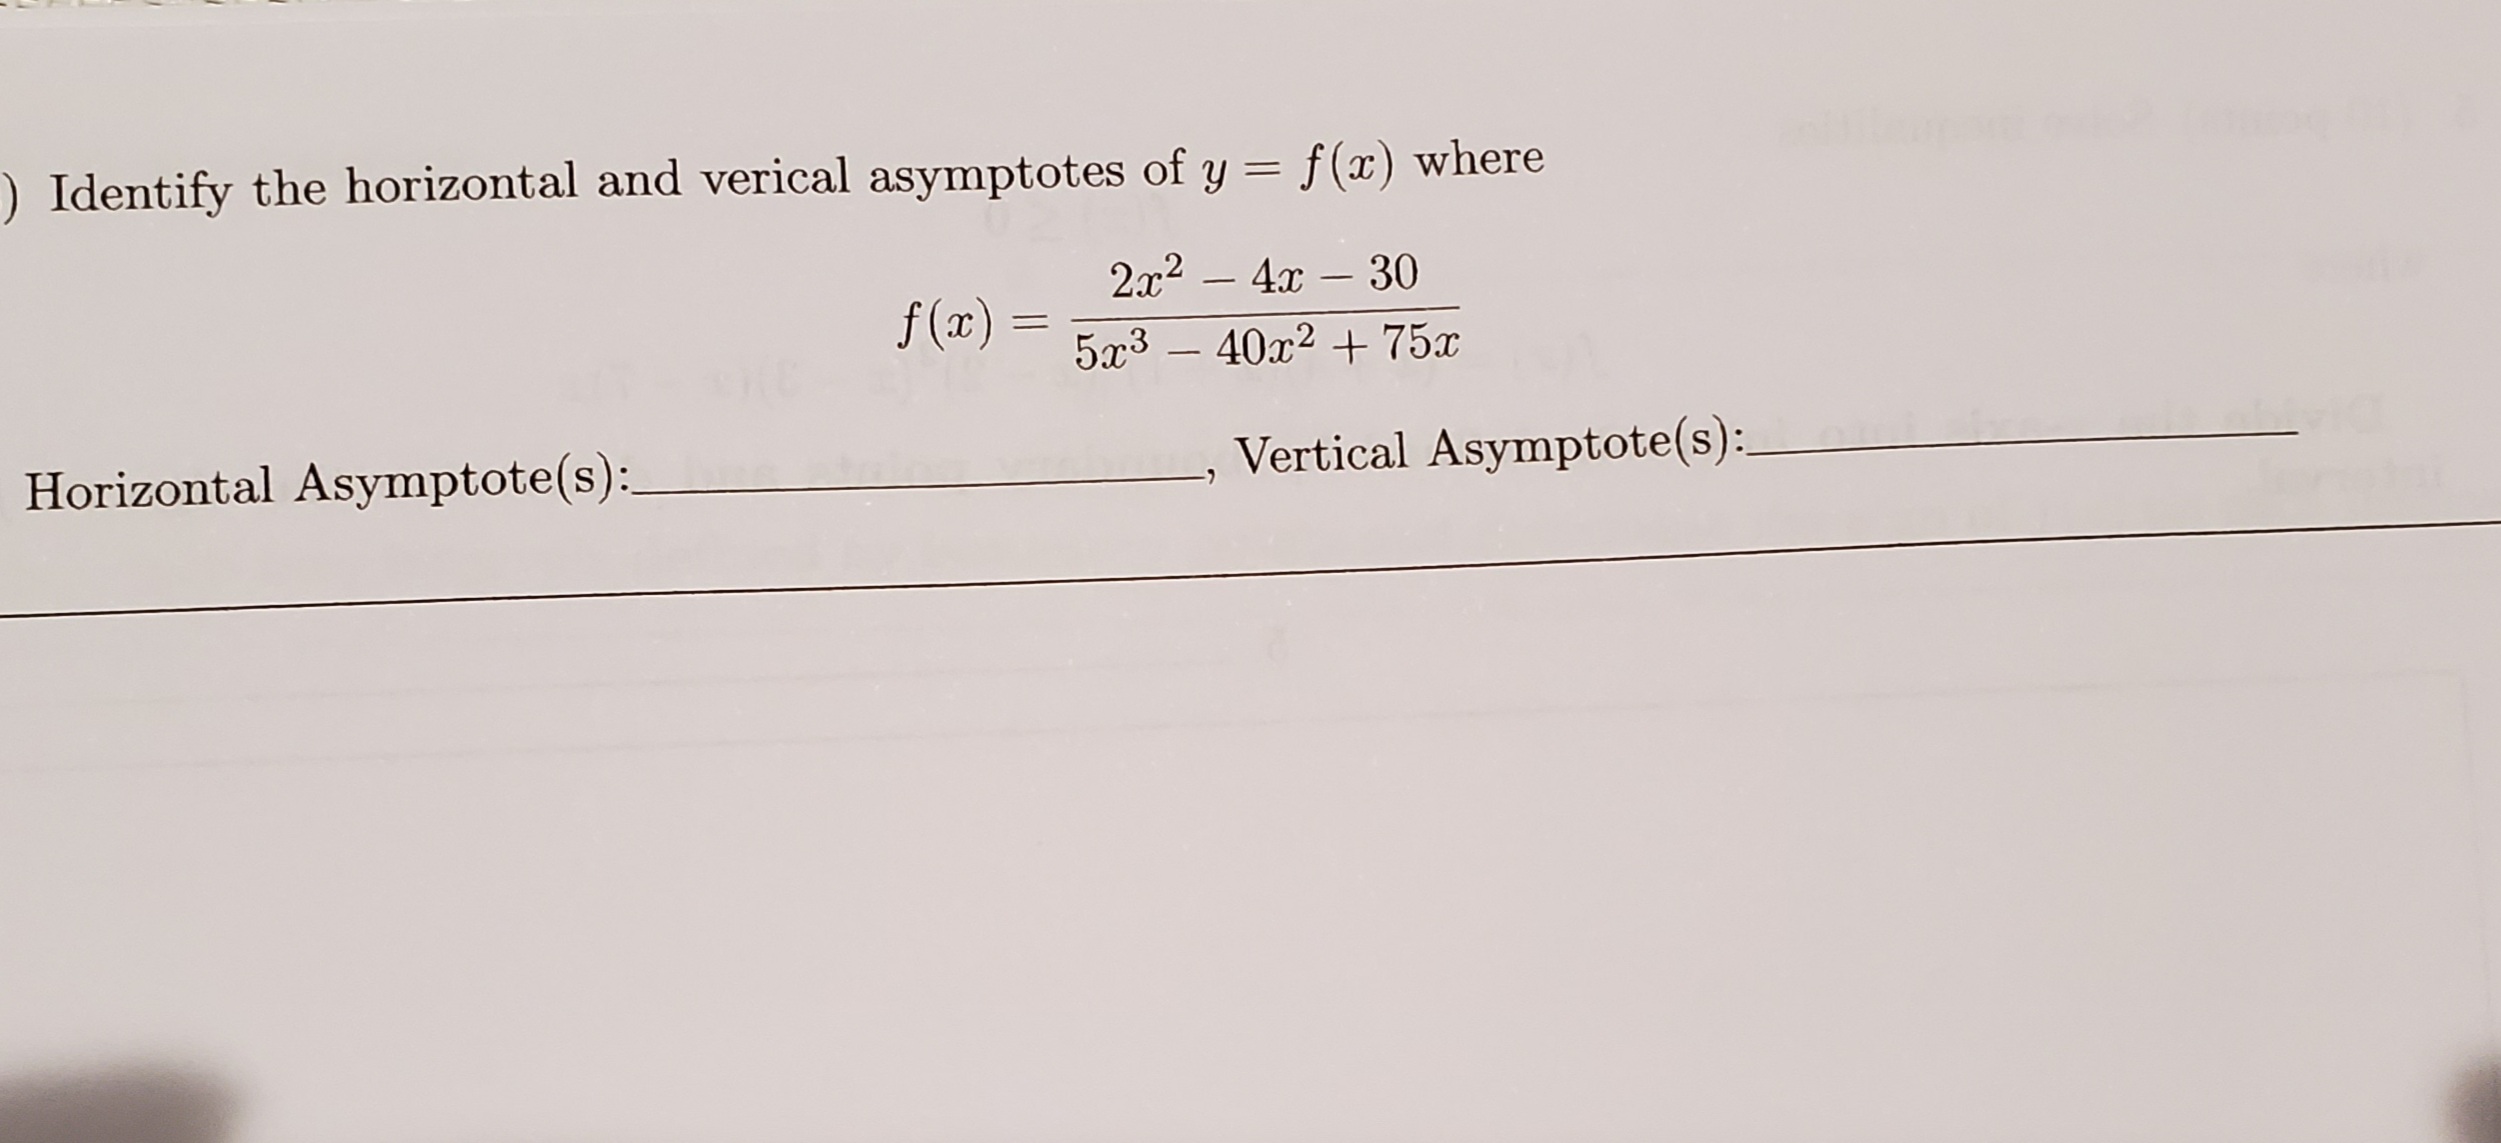 ) Identify the horizontal and verical asymptotes of y = f(x) where
%3D
2x2 – 4x – 30
f (x)
5x3 – 40x2 + 75x
Horizontal Asymptote(s):
Vertical Asymptote(s):.
